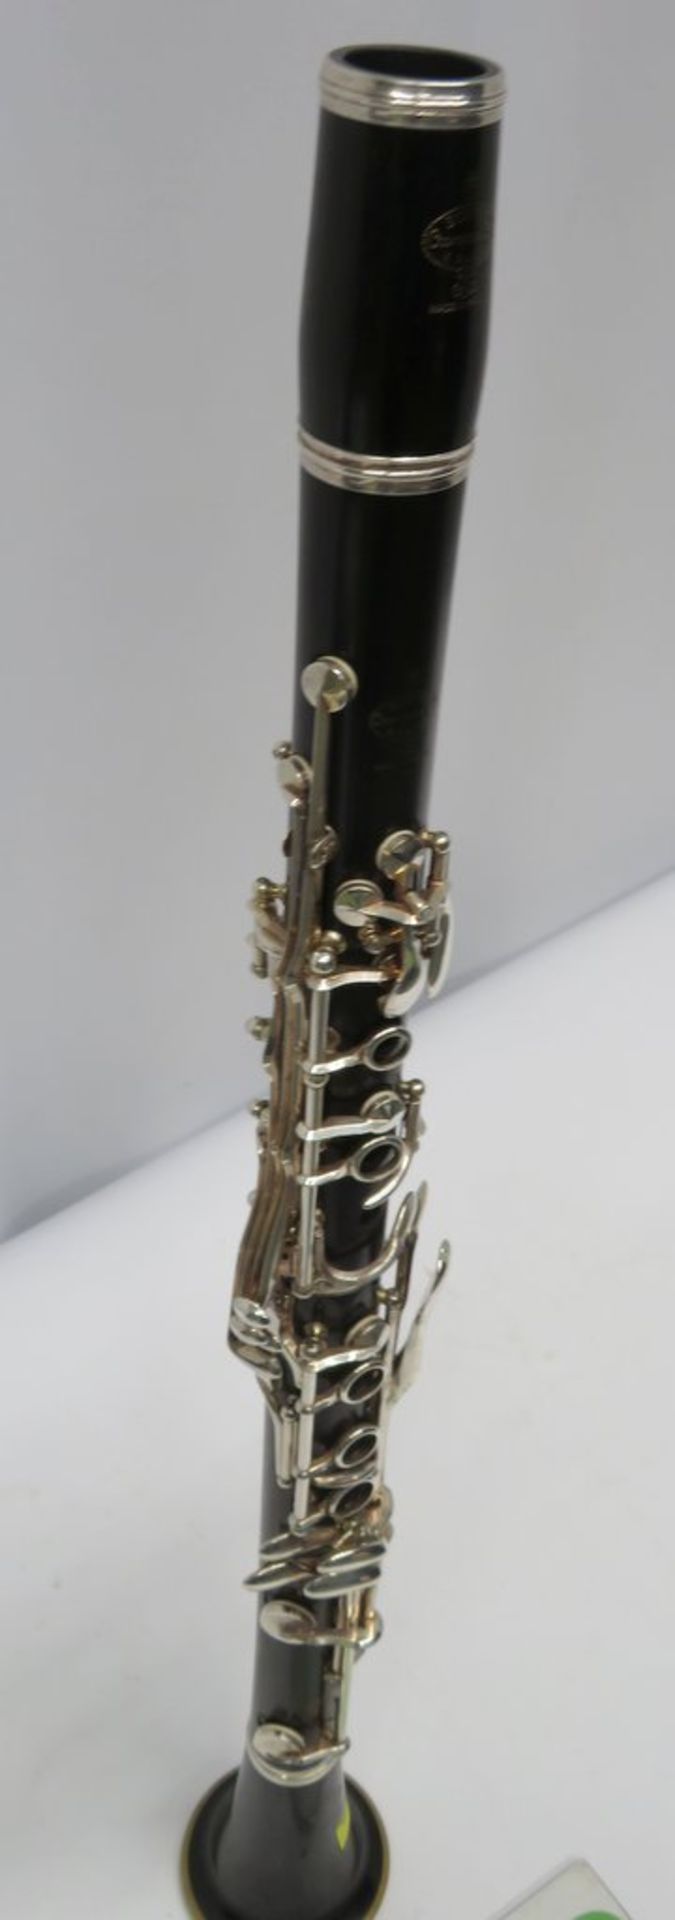 Buffet Crampon Clarinet Complete With Case. - Image 13 of 20